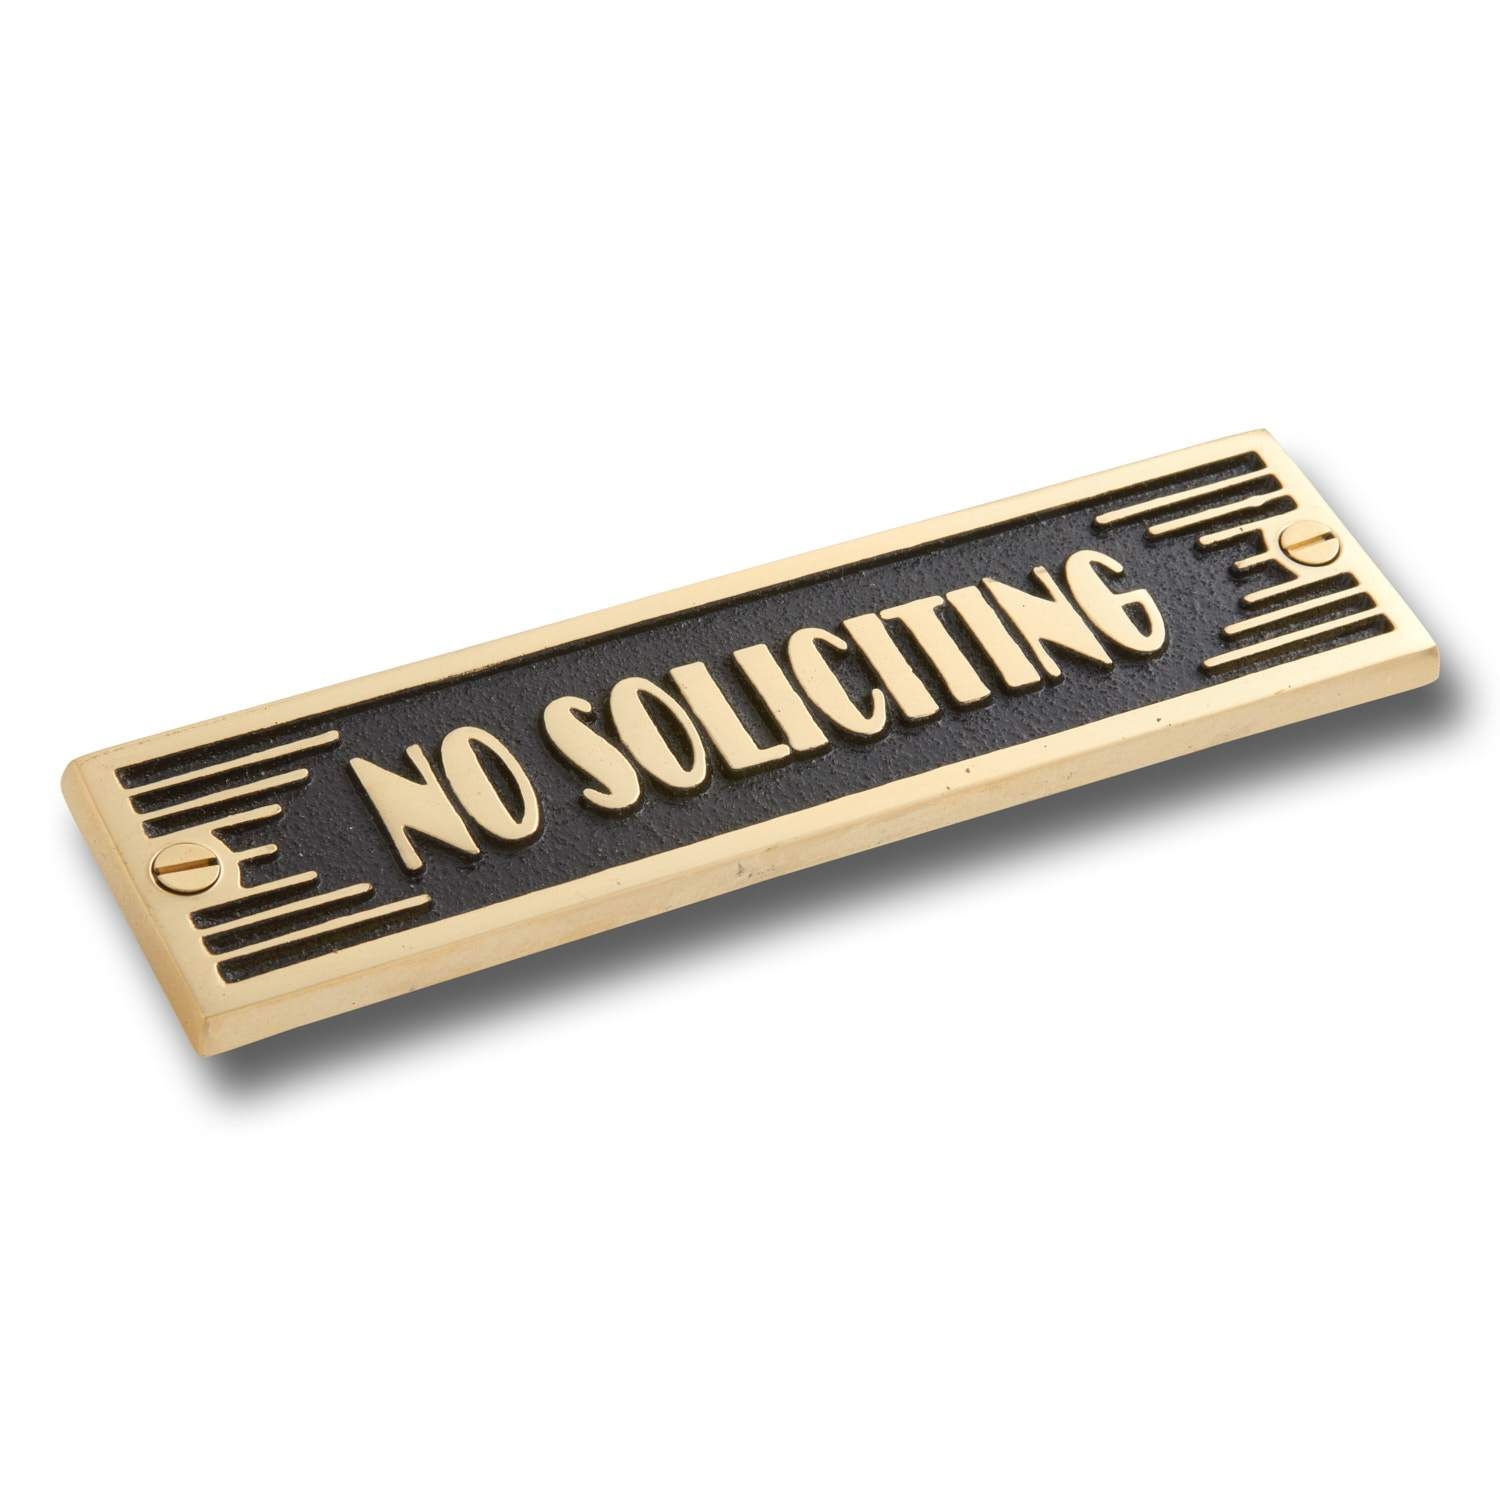 No Soliciting Metal Door Sign.  Art Deco Style Home Décor Wall Plaque Accessories – No Soliciting + Arrow Brass